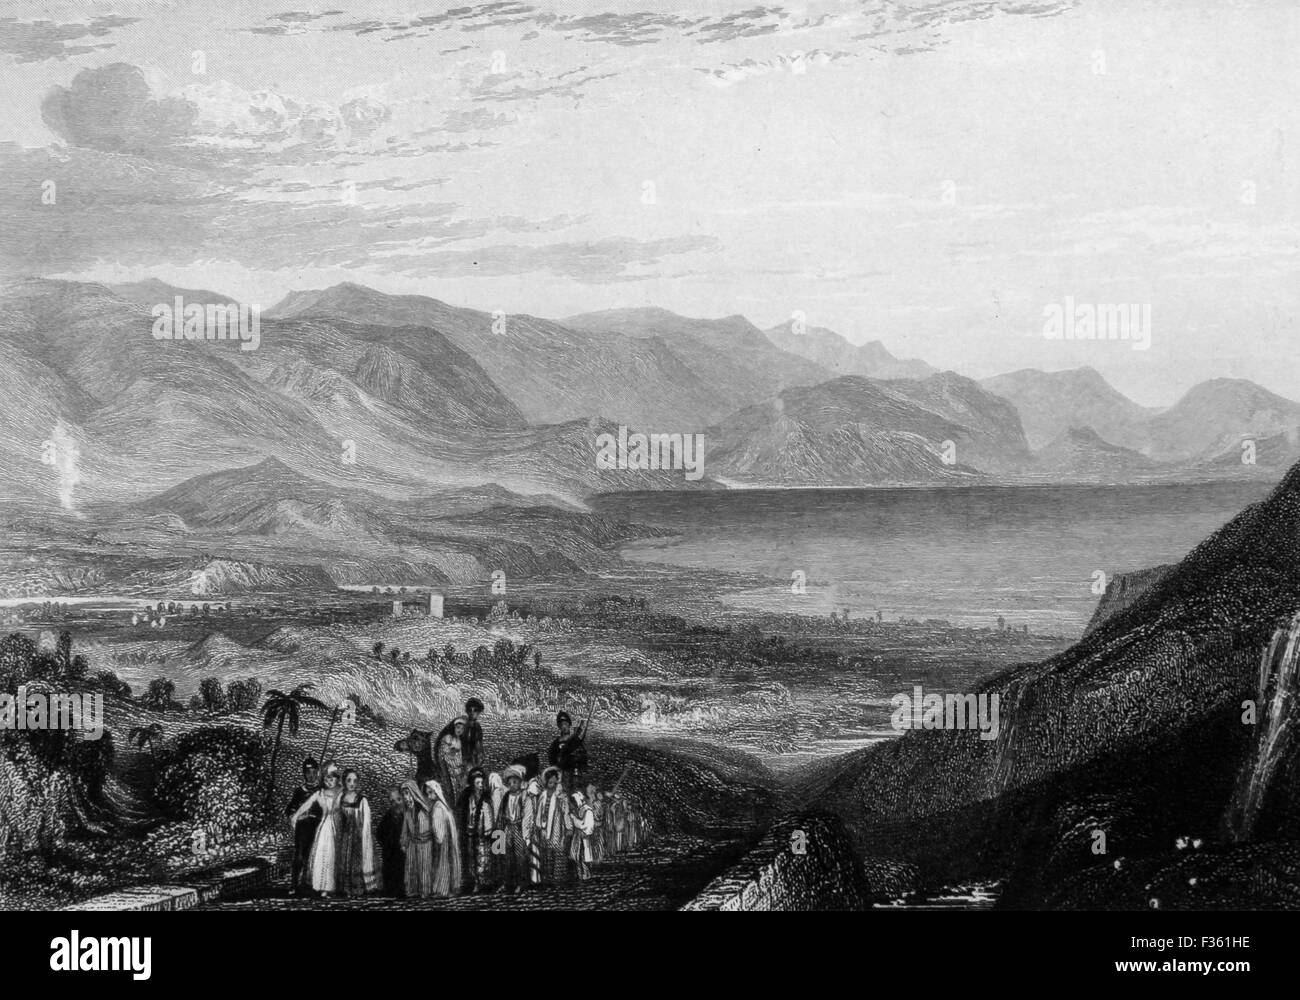 The Dead Sea, Jericho and the Mouth of the Jordan River. Black and White Illustration from Landscapes of the Bible Stock Photo